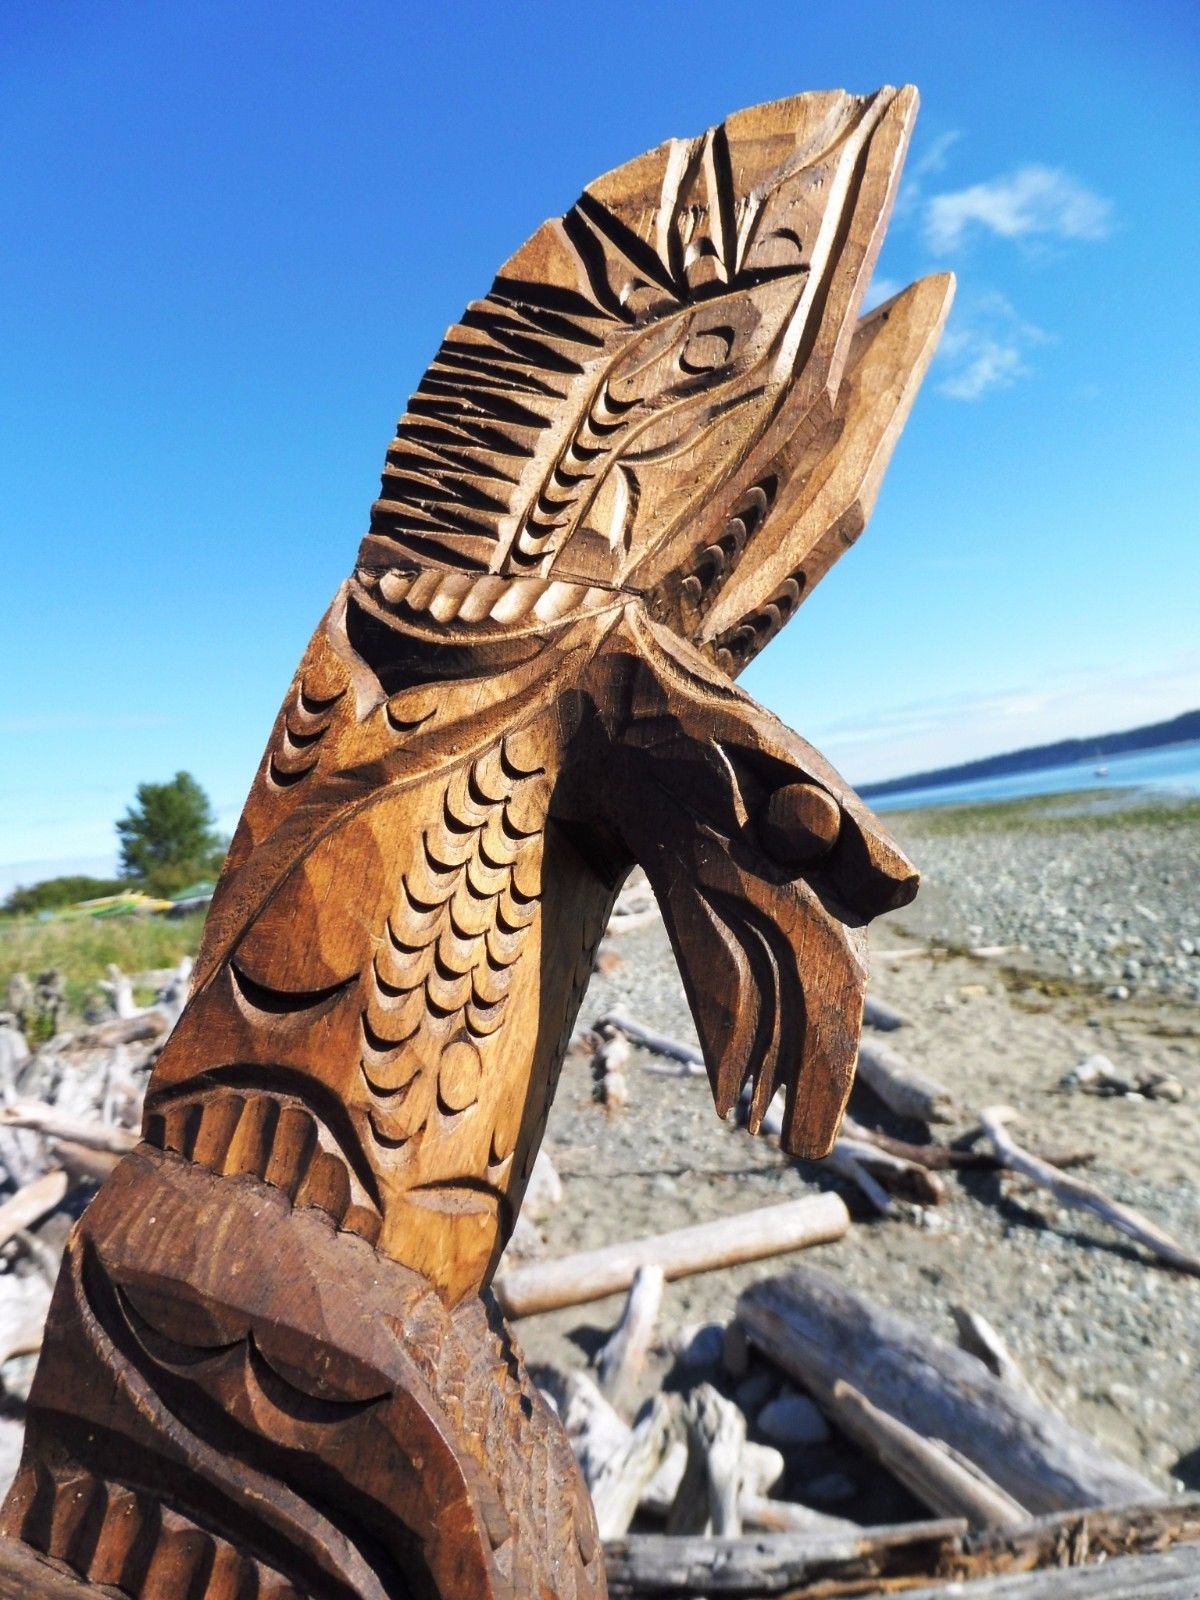 Northwest Coast First Nations Native Art carving Nuu-chah-nulth EAGLE TOTEM POLE